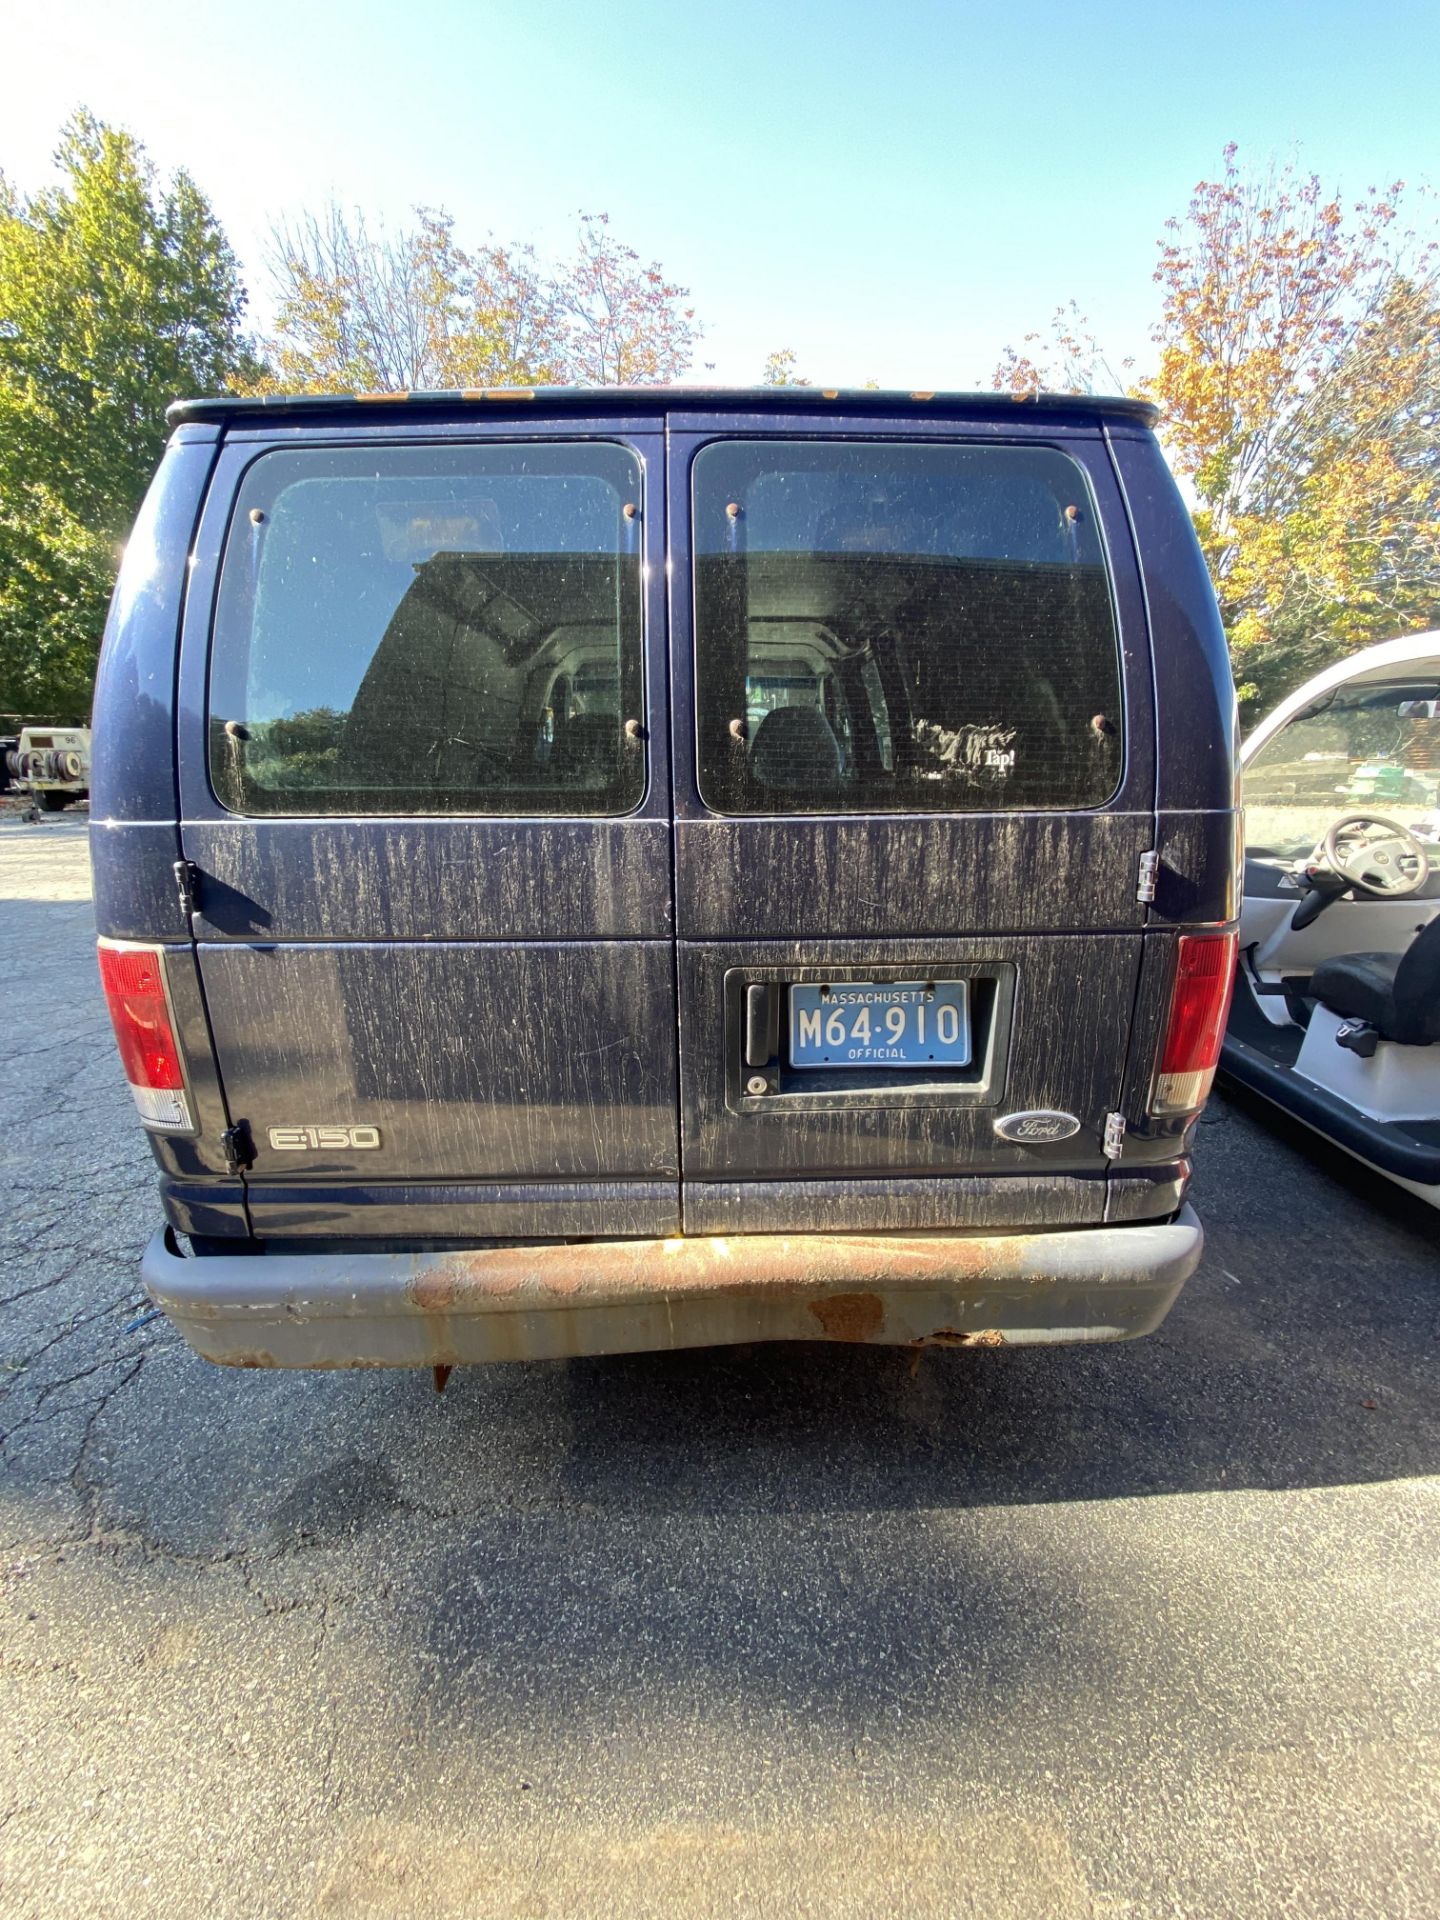 2004 Ford E150 Cargo Van Odom: NA, Rear Barn Doors w/ Glass and Side Door w/ Glass, VIN: - Image 4 of 8